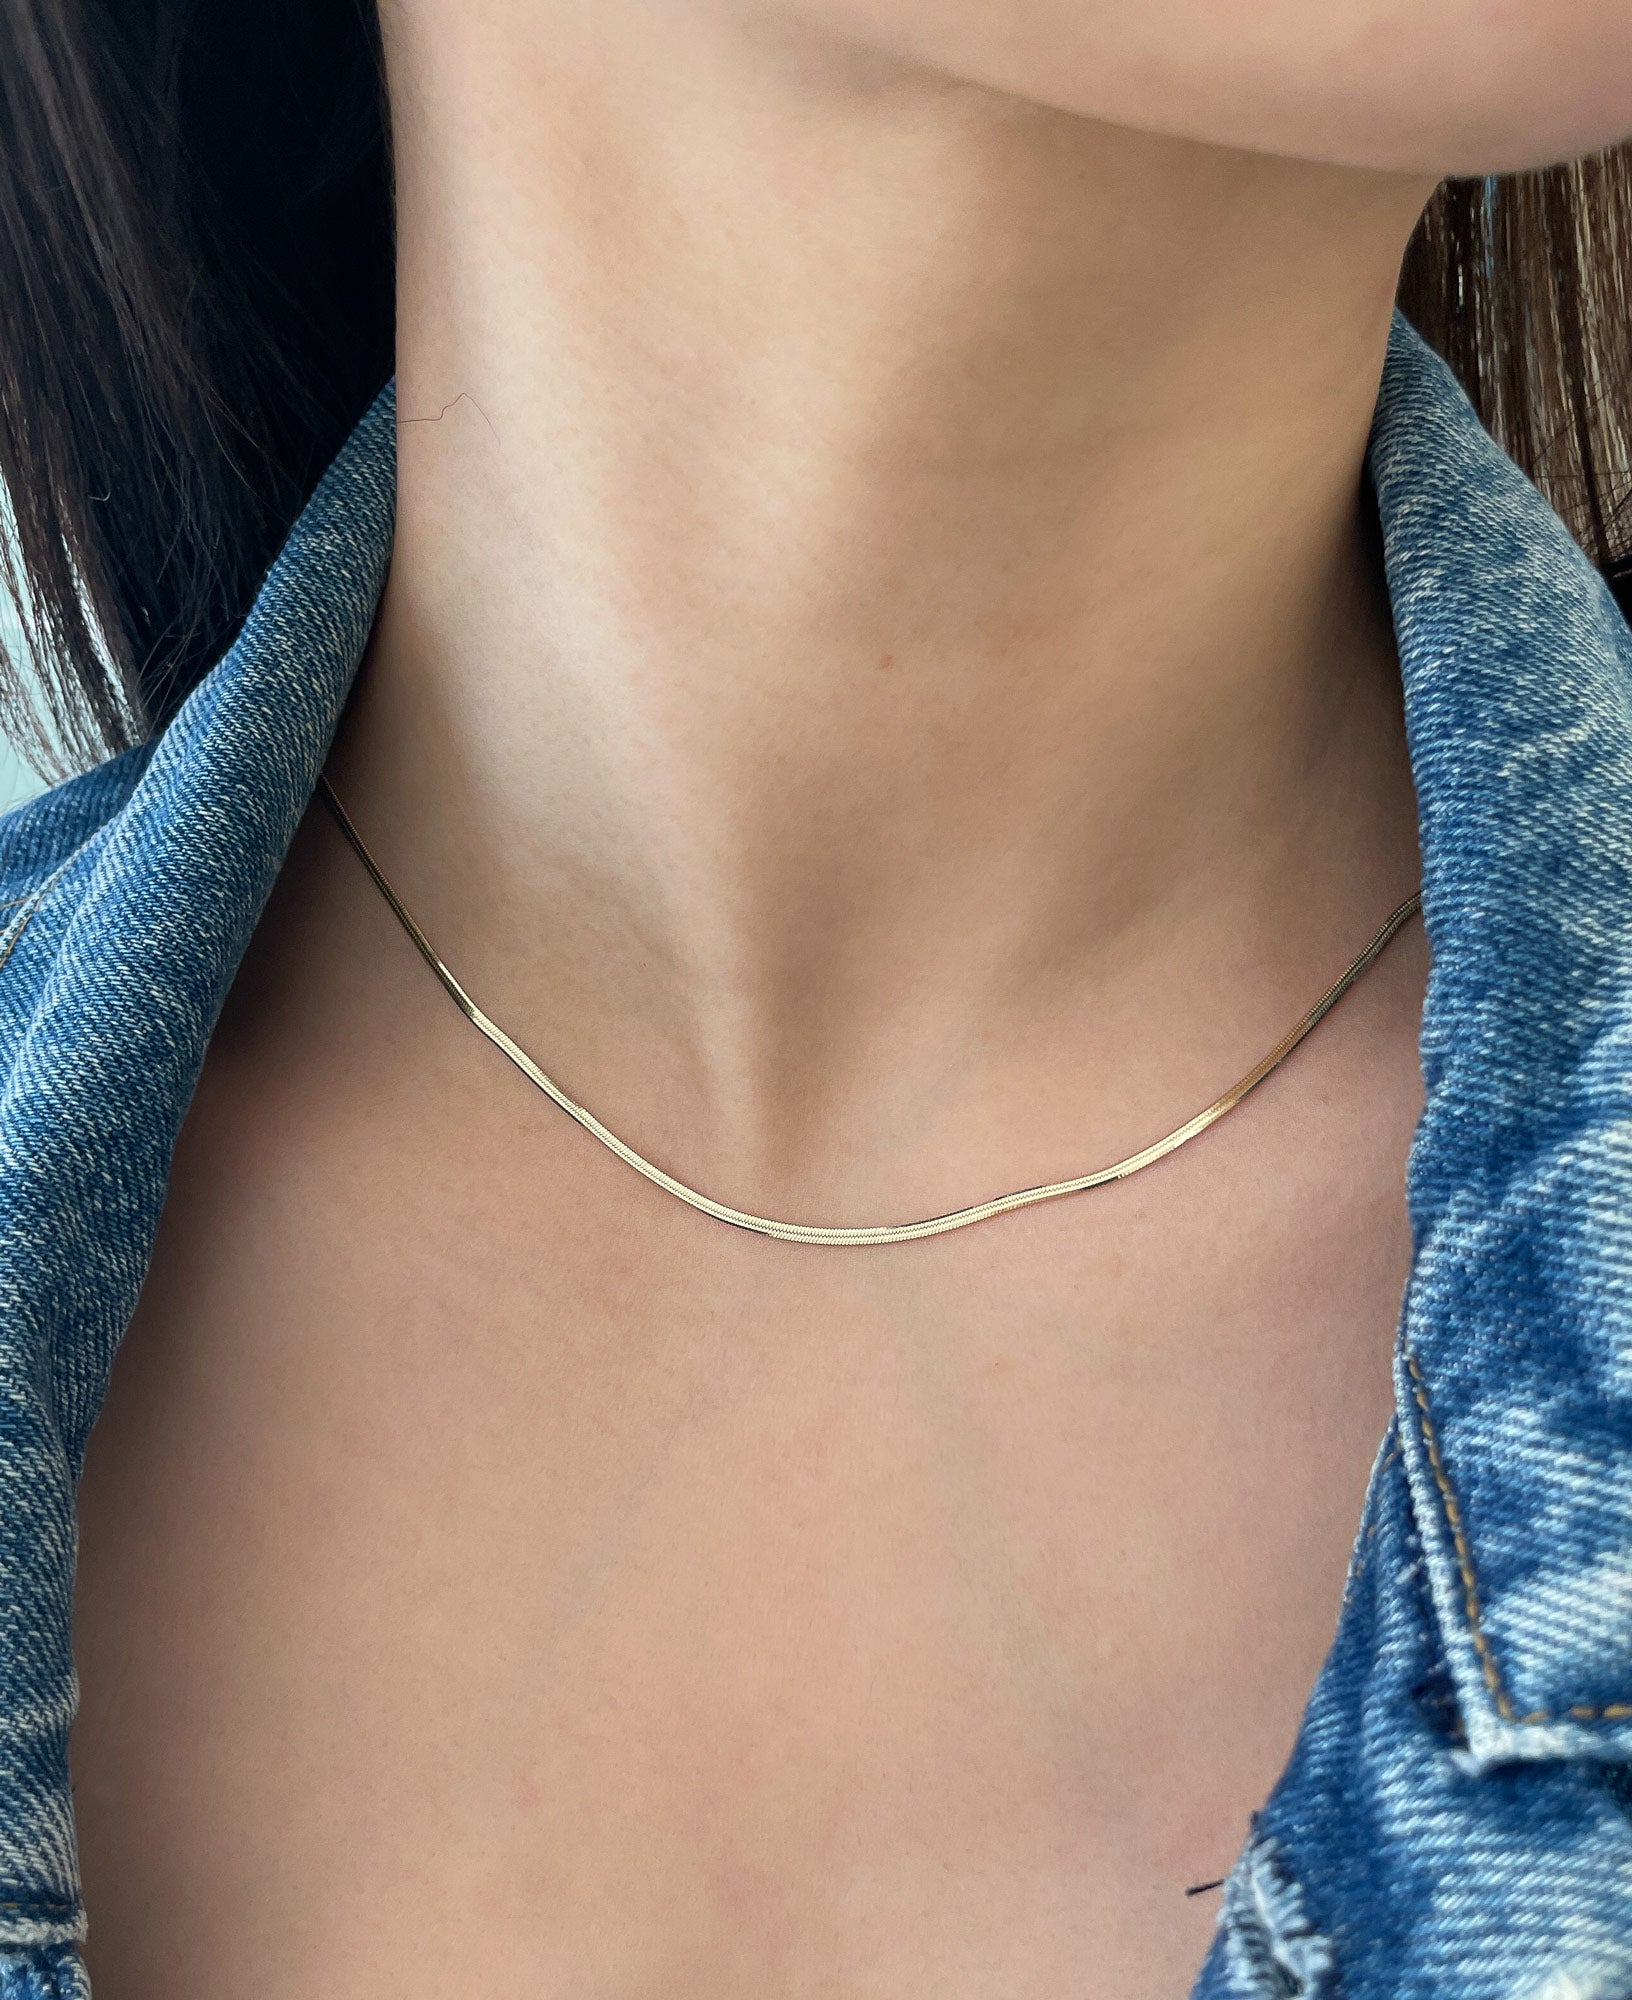 Marcelle 14k Solid Gold Baby Herringbone Chain Necklace